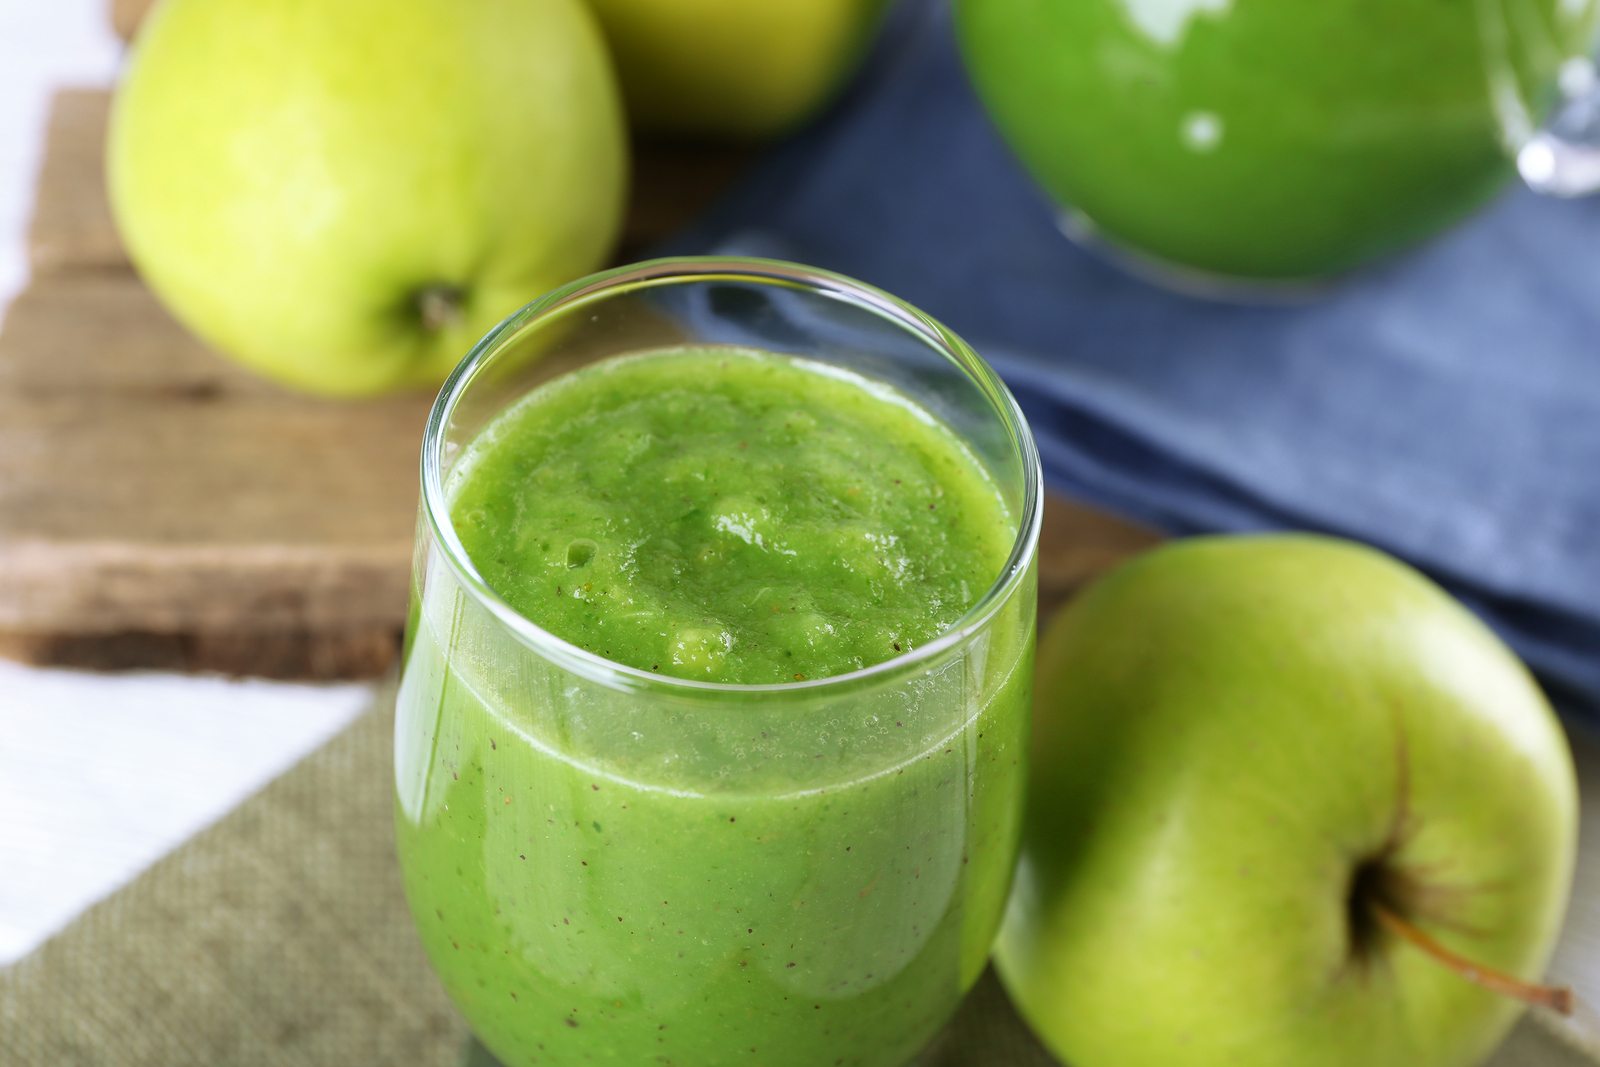 Candida Glowing Green Smoothie Recipe